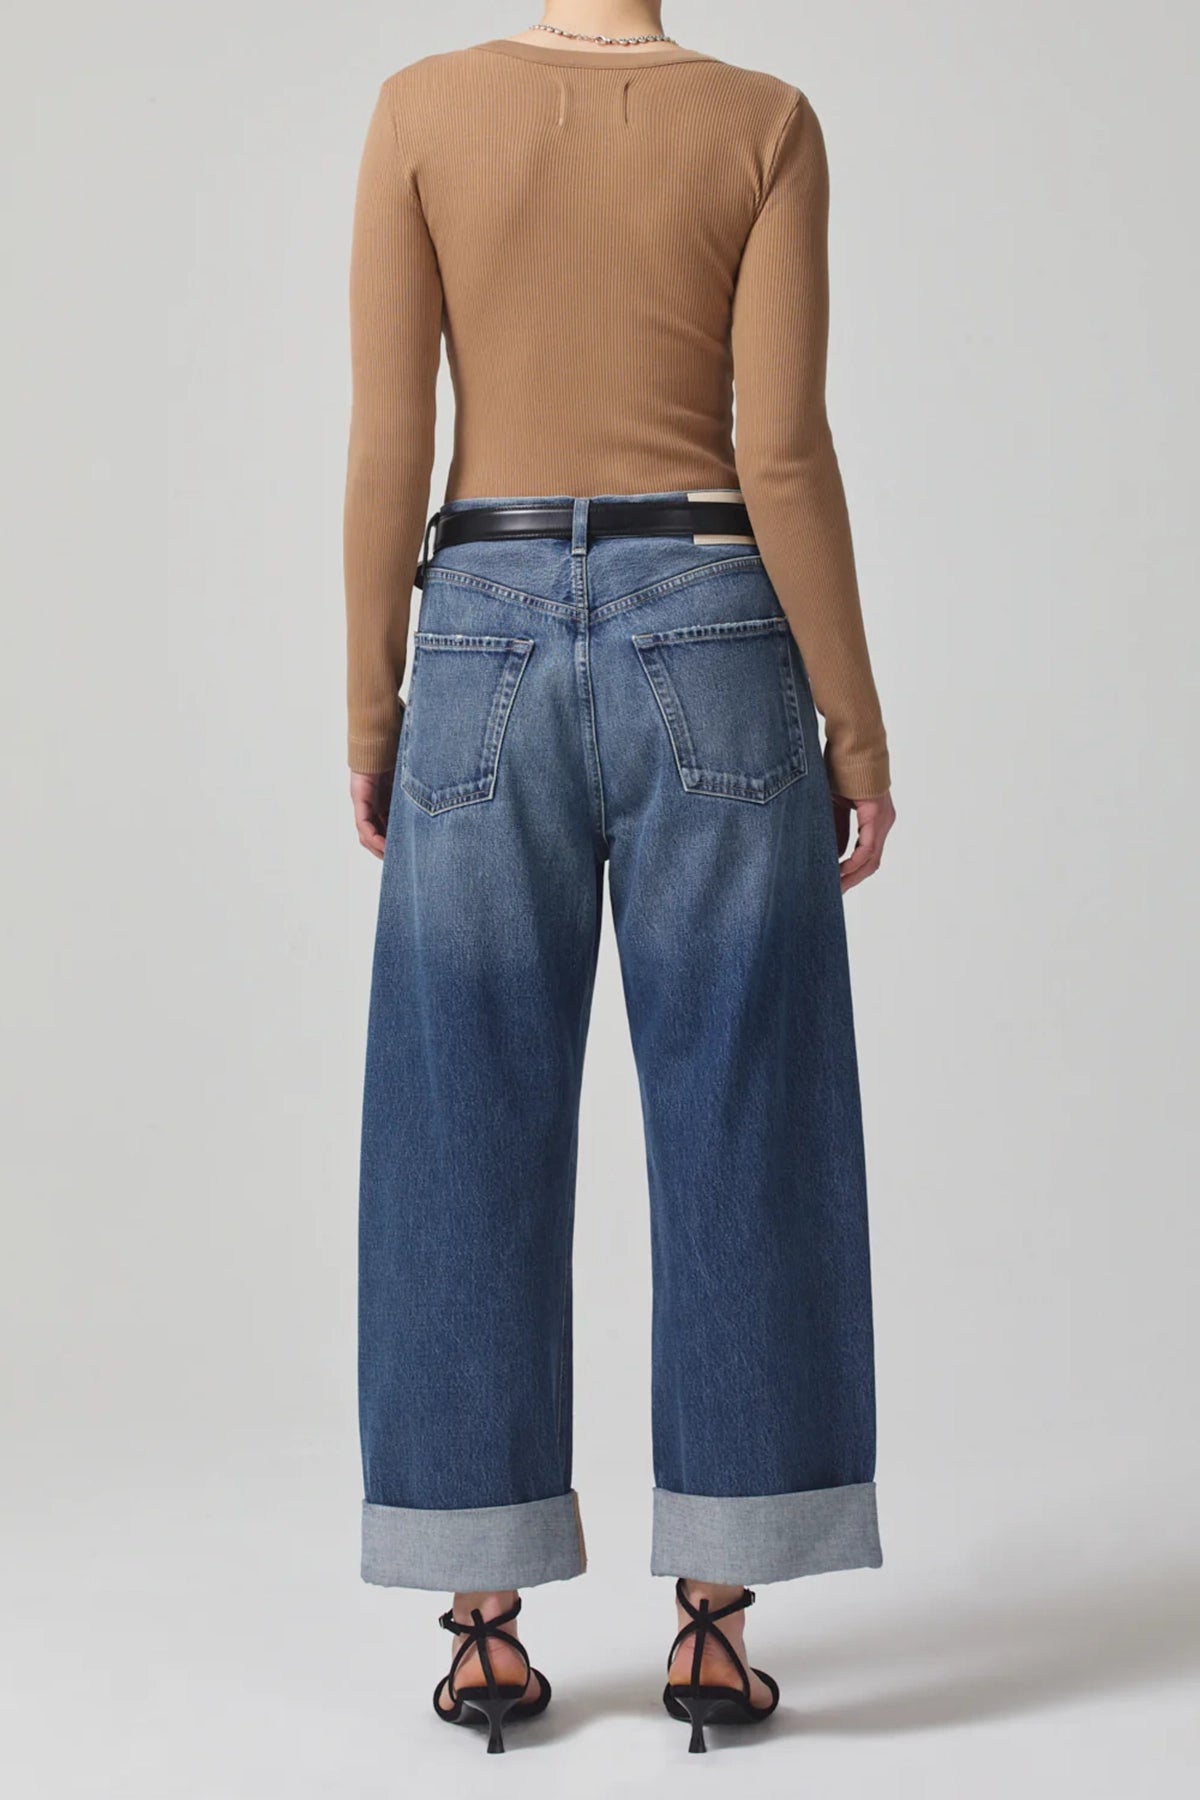 Citizens of Humanity Ayla Baggy Jeans